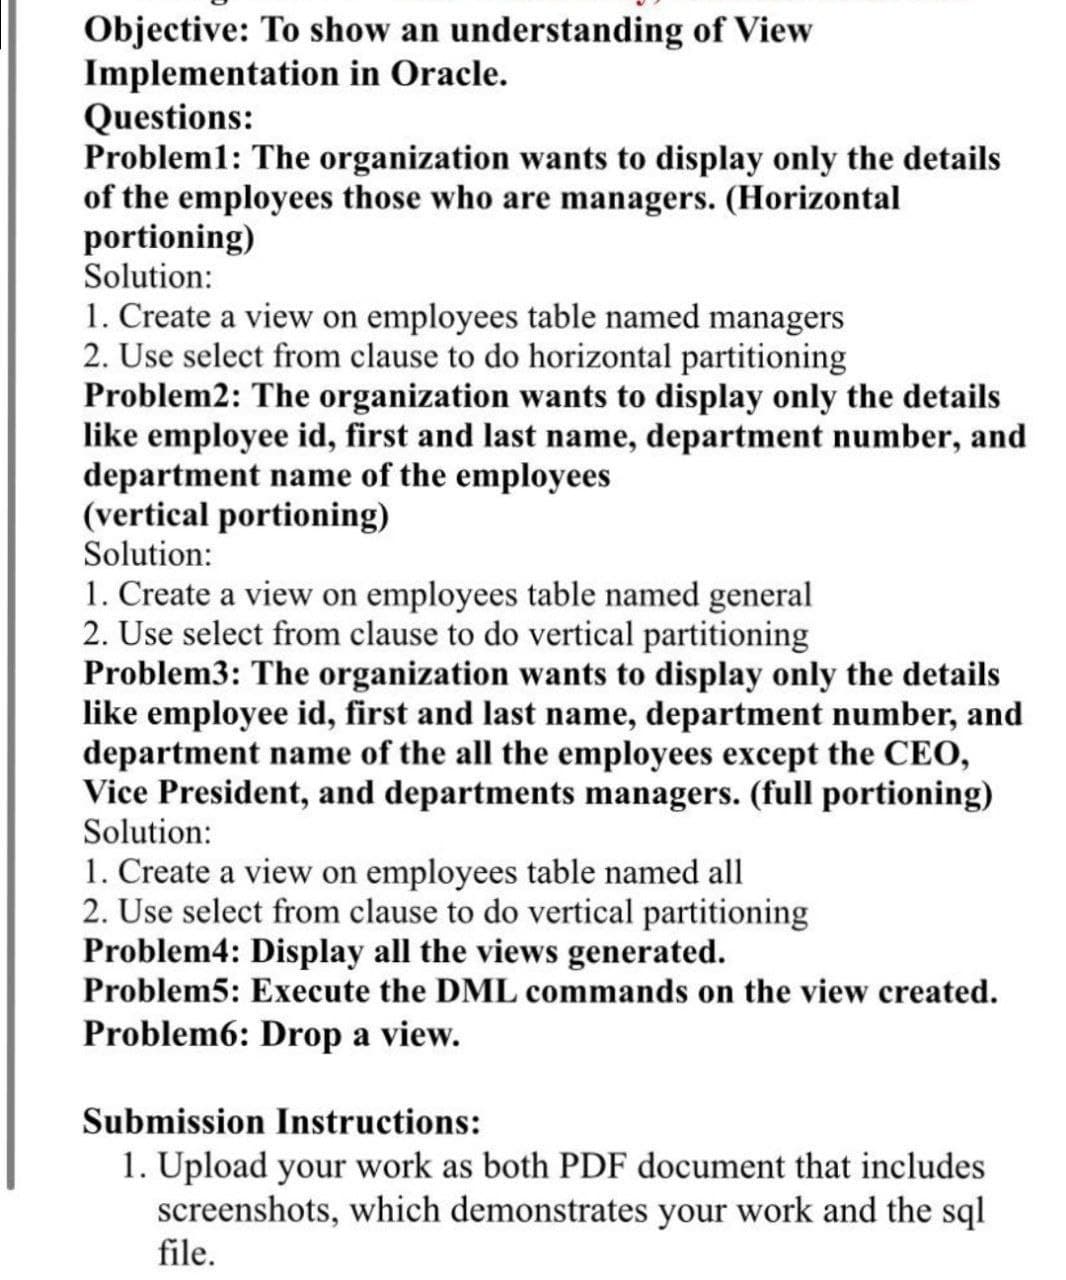 Objective: To show an understanding of View
Implementation in Oracle.
Questions:
Problem1: The organization wants to display only the details
of the employees those who are managers. (Horizontal
portioning)
Solution:
1. Create a view on employees table named managers
2. Use select from clause to do horizontal partitioning
Problem2: The organization wants to display only the details
like employee id, first and last name, department number, and
department name of the employees
(vertical portioning)
Solution:
1. Create a view on employees table named general
2. Use select from clause to do vertical partitioning
Problem3: The organization wants to display only the details
like employee id, first and last name, department number, and
department name of the all the employees except the CEO,
Vice President, and departments managers. (full portioning)
Solution:
1. Create a view on employees table named all
2. Use select from clause to do vertical partitioning
Problem4: Display all the views generated.
Problem5: Execute the DML commands on the view created.
Problem6: Drop a view.
Submission Instructions:
1. Upload your work as both PDF document that includes
screenshots, which demonstrates your work and the sql
file.
